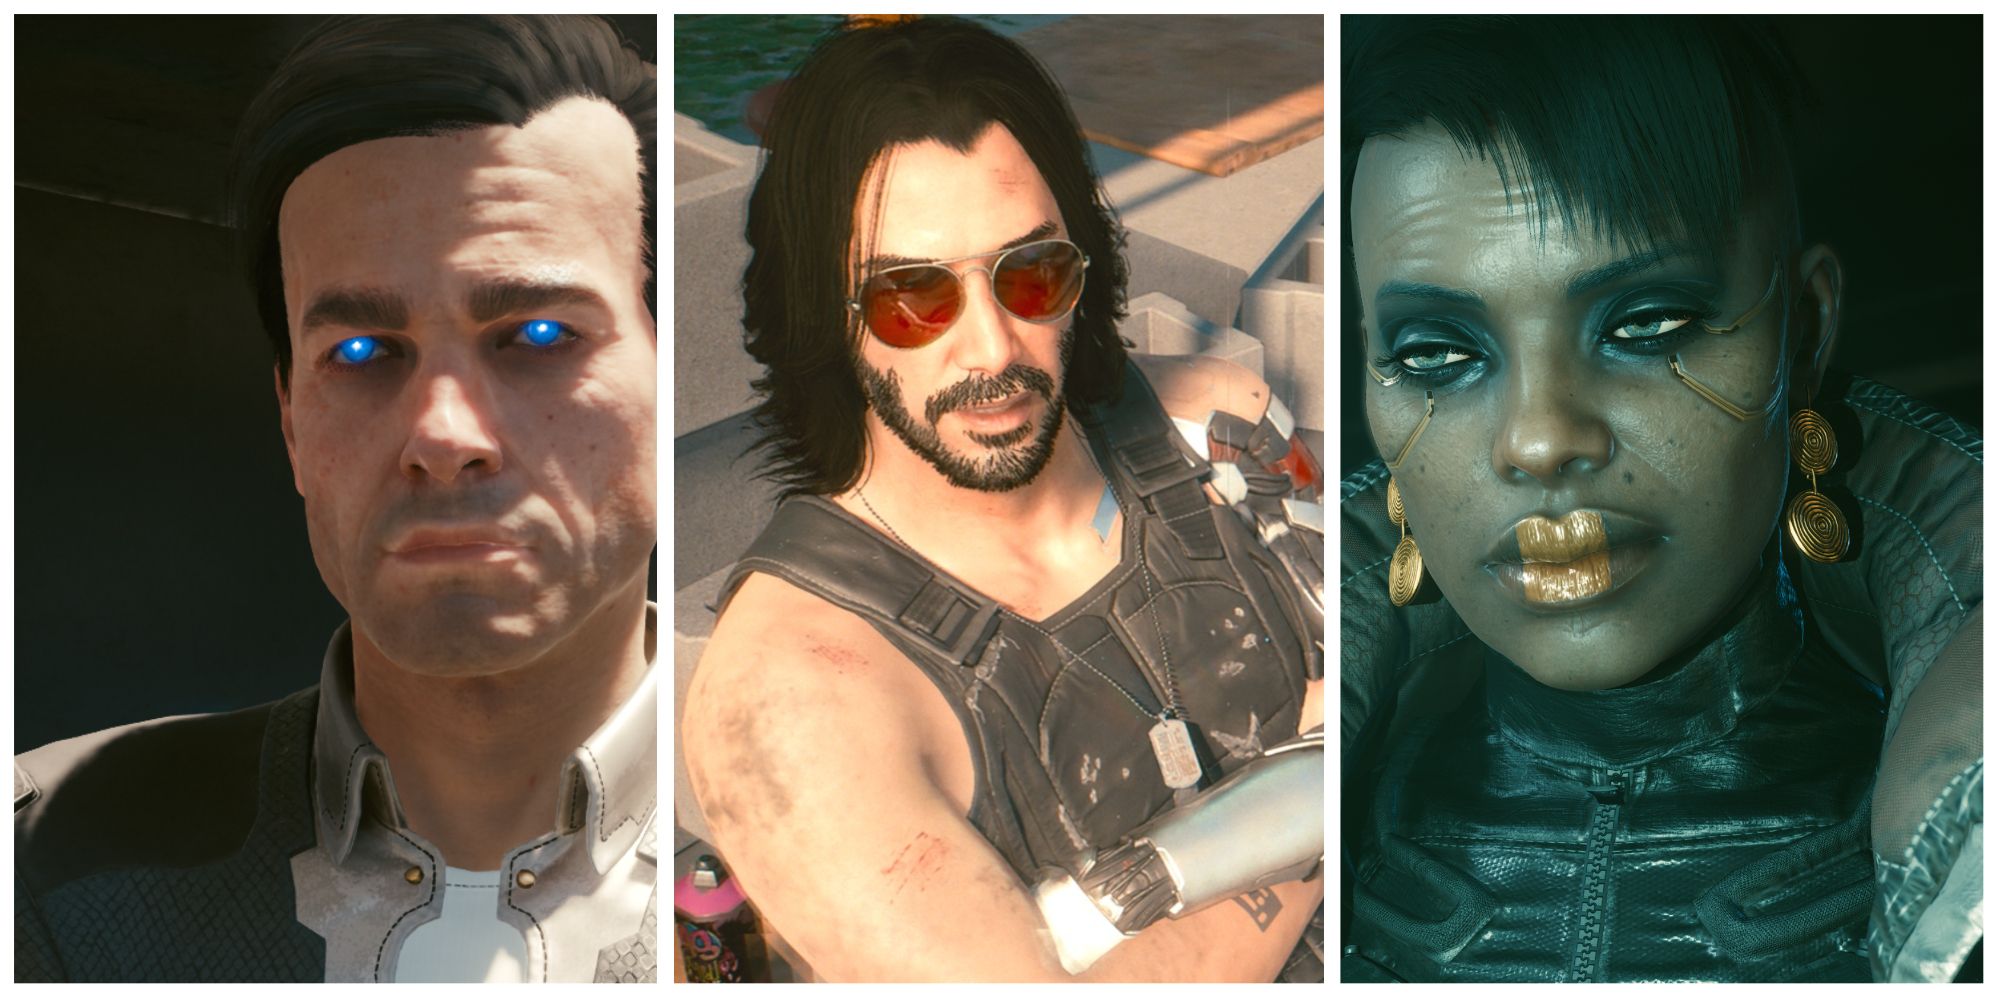 mr blue eyes, johnny silverhand and brigette from cyberpunk 2077